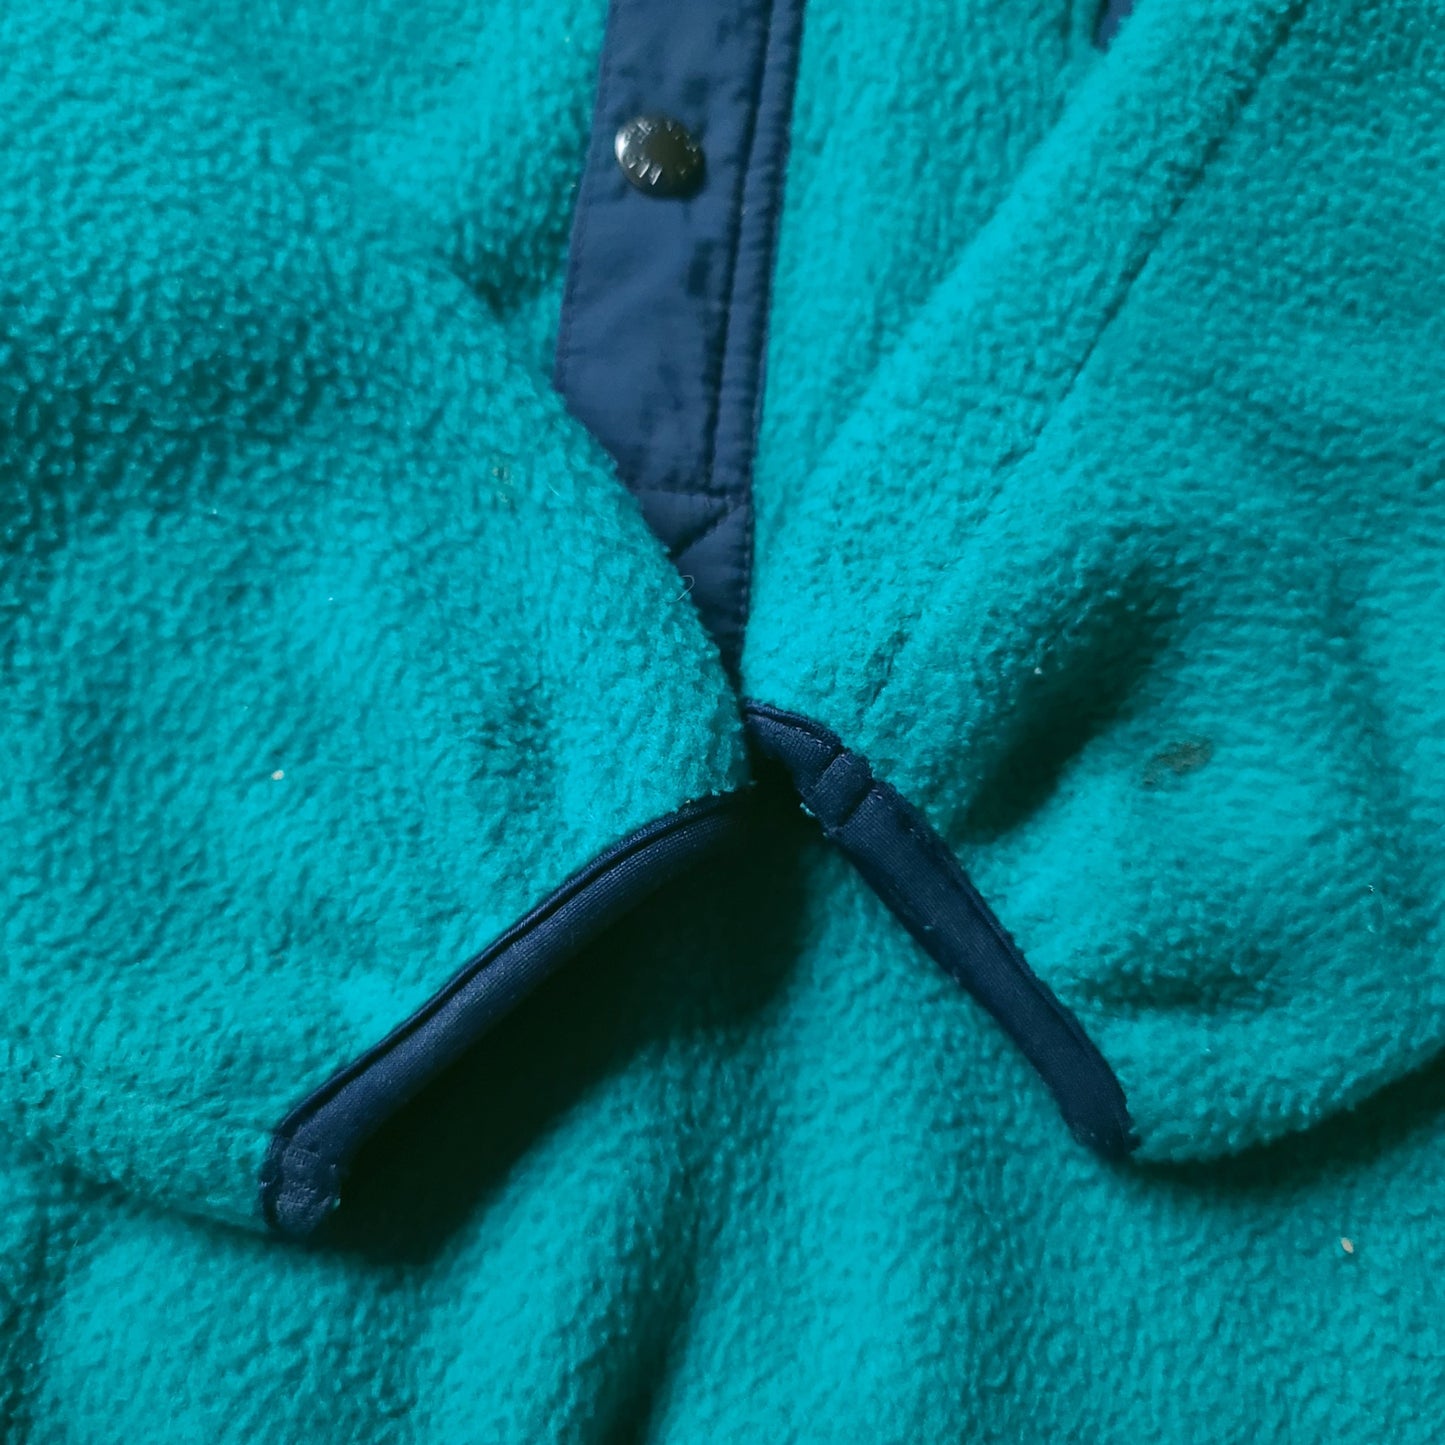 North Face Turquoise Fleece Sweater